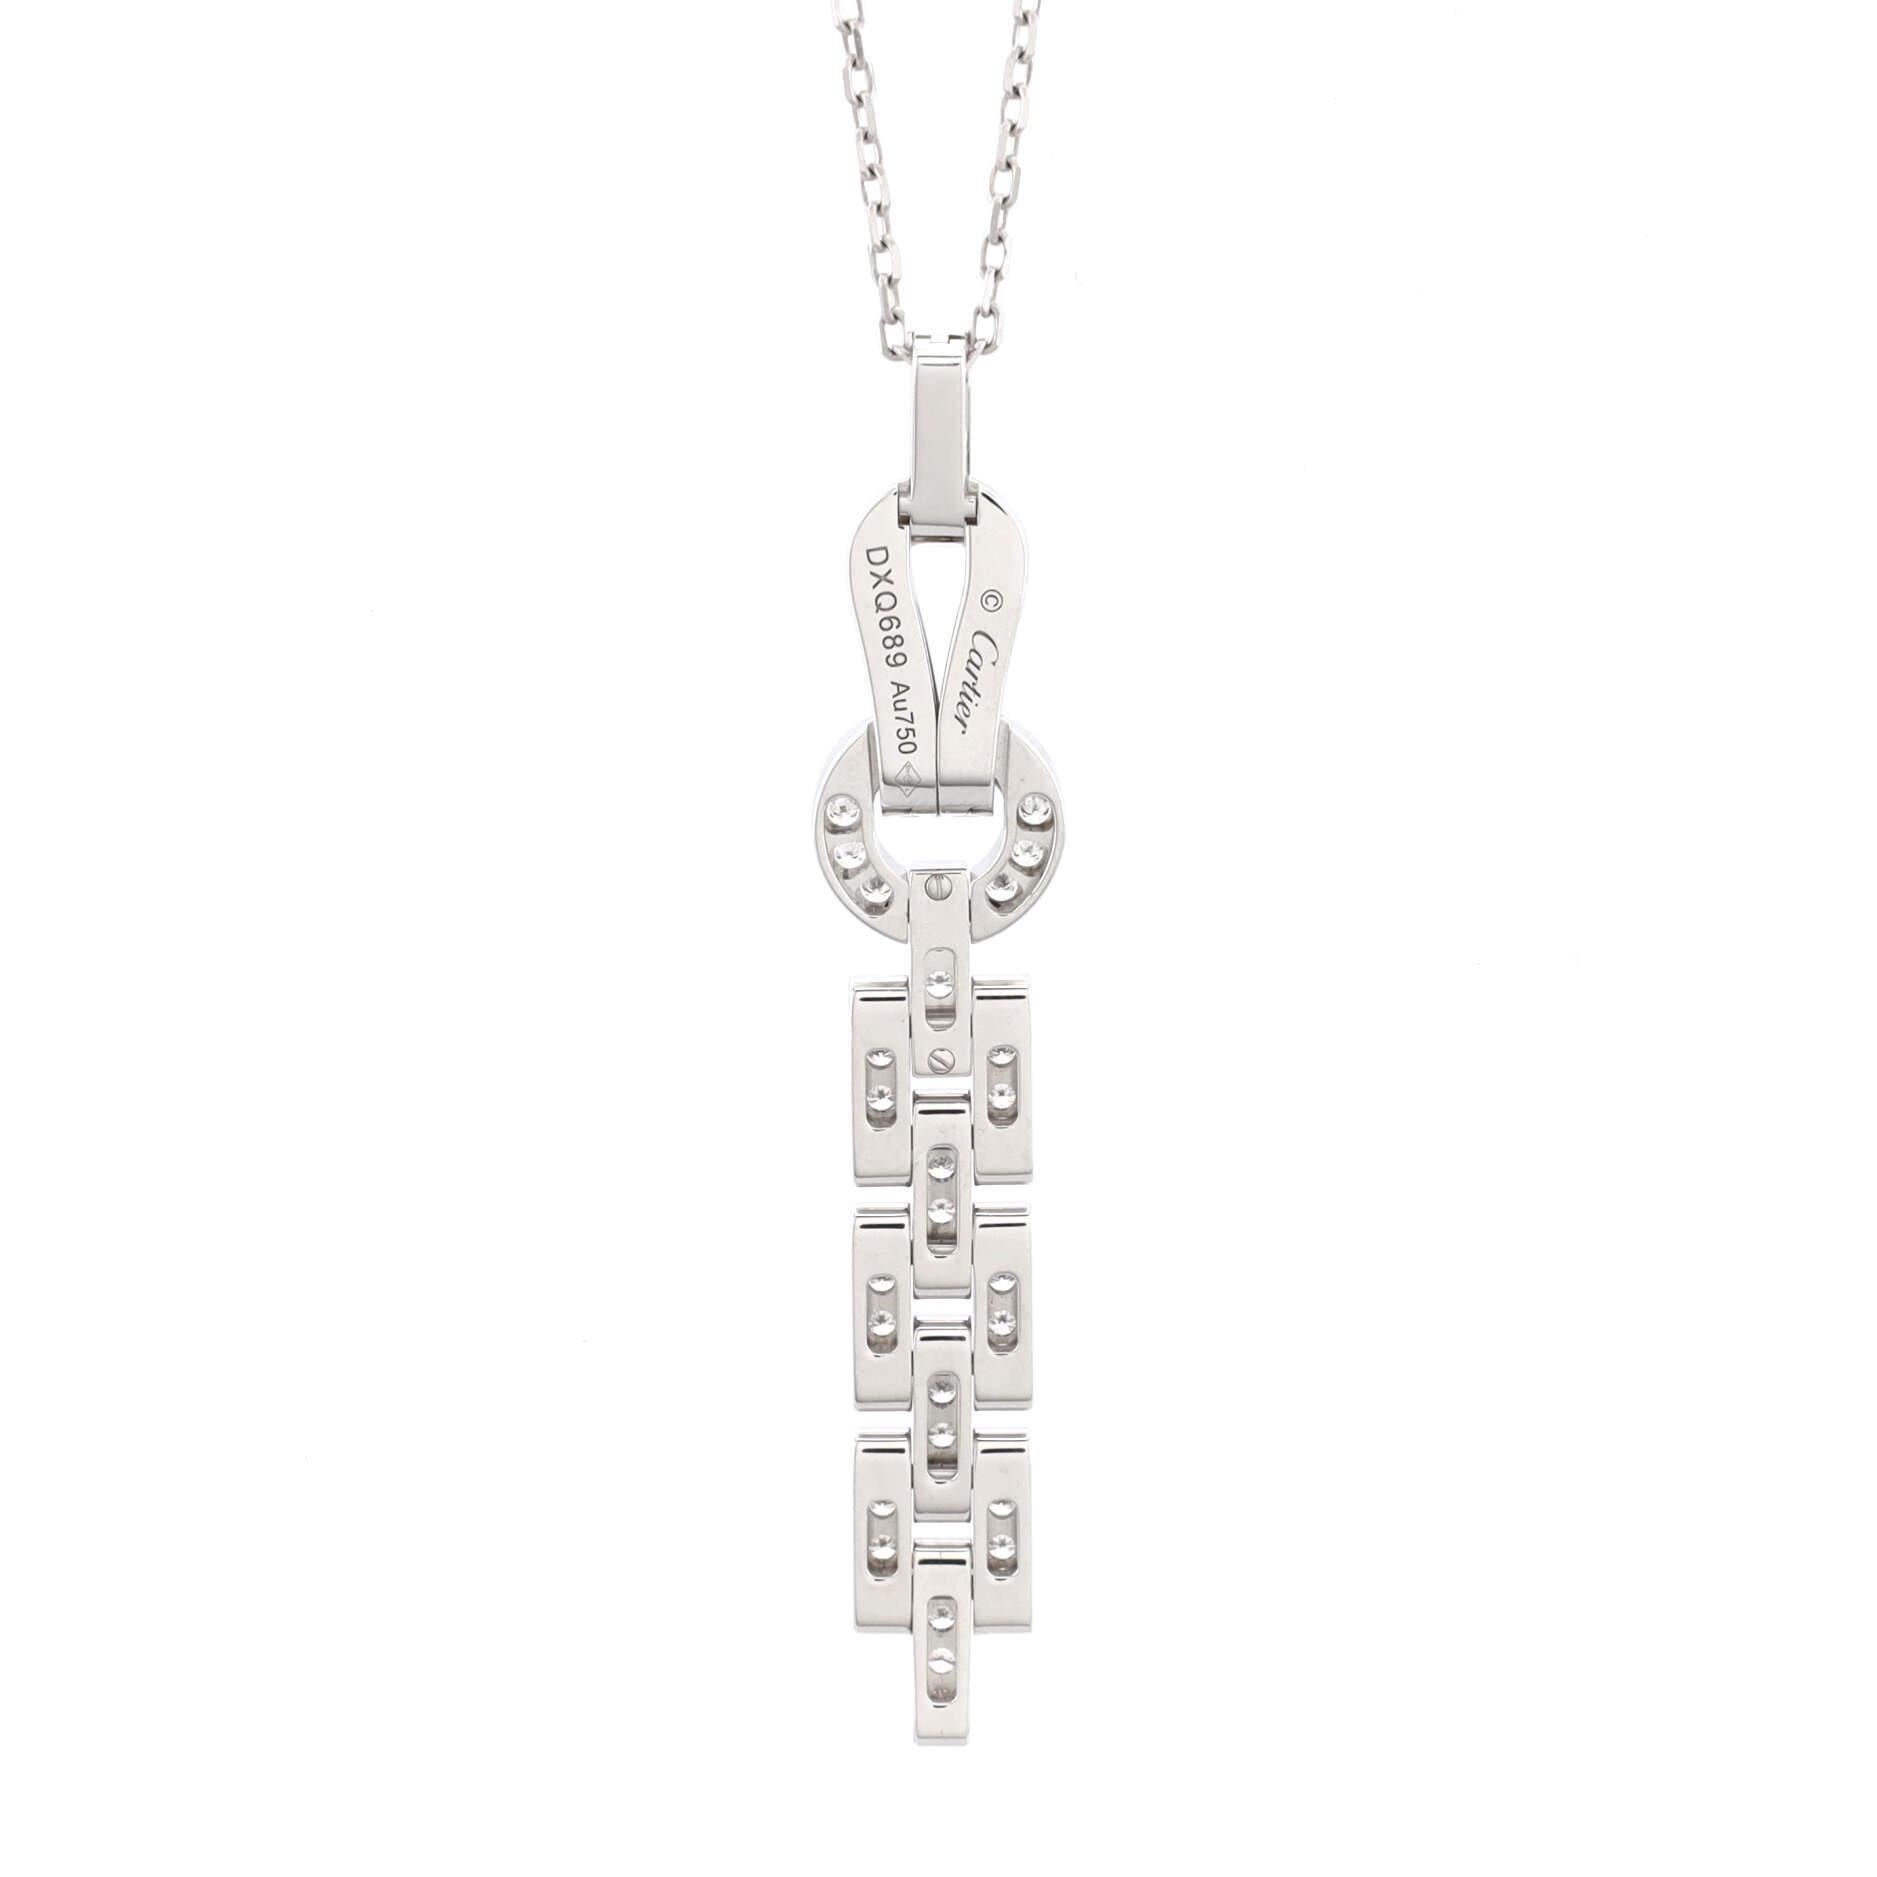 Cartier Agrafe Drop Pendant Necklace 18k White Gold and Diamonds 1